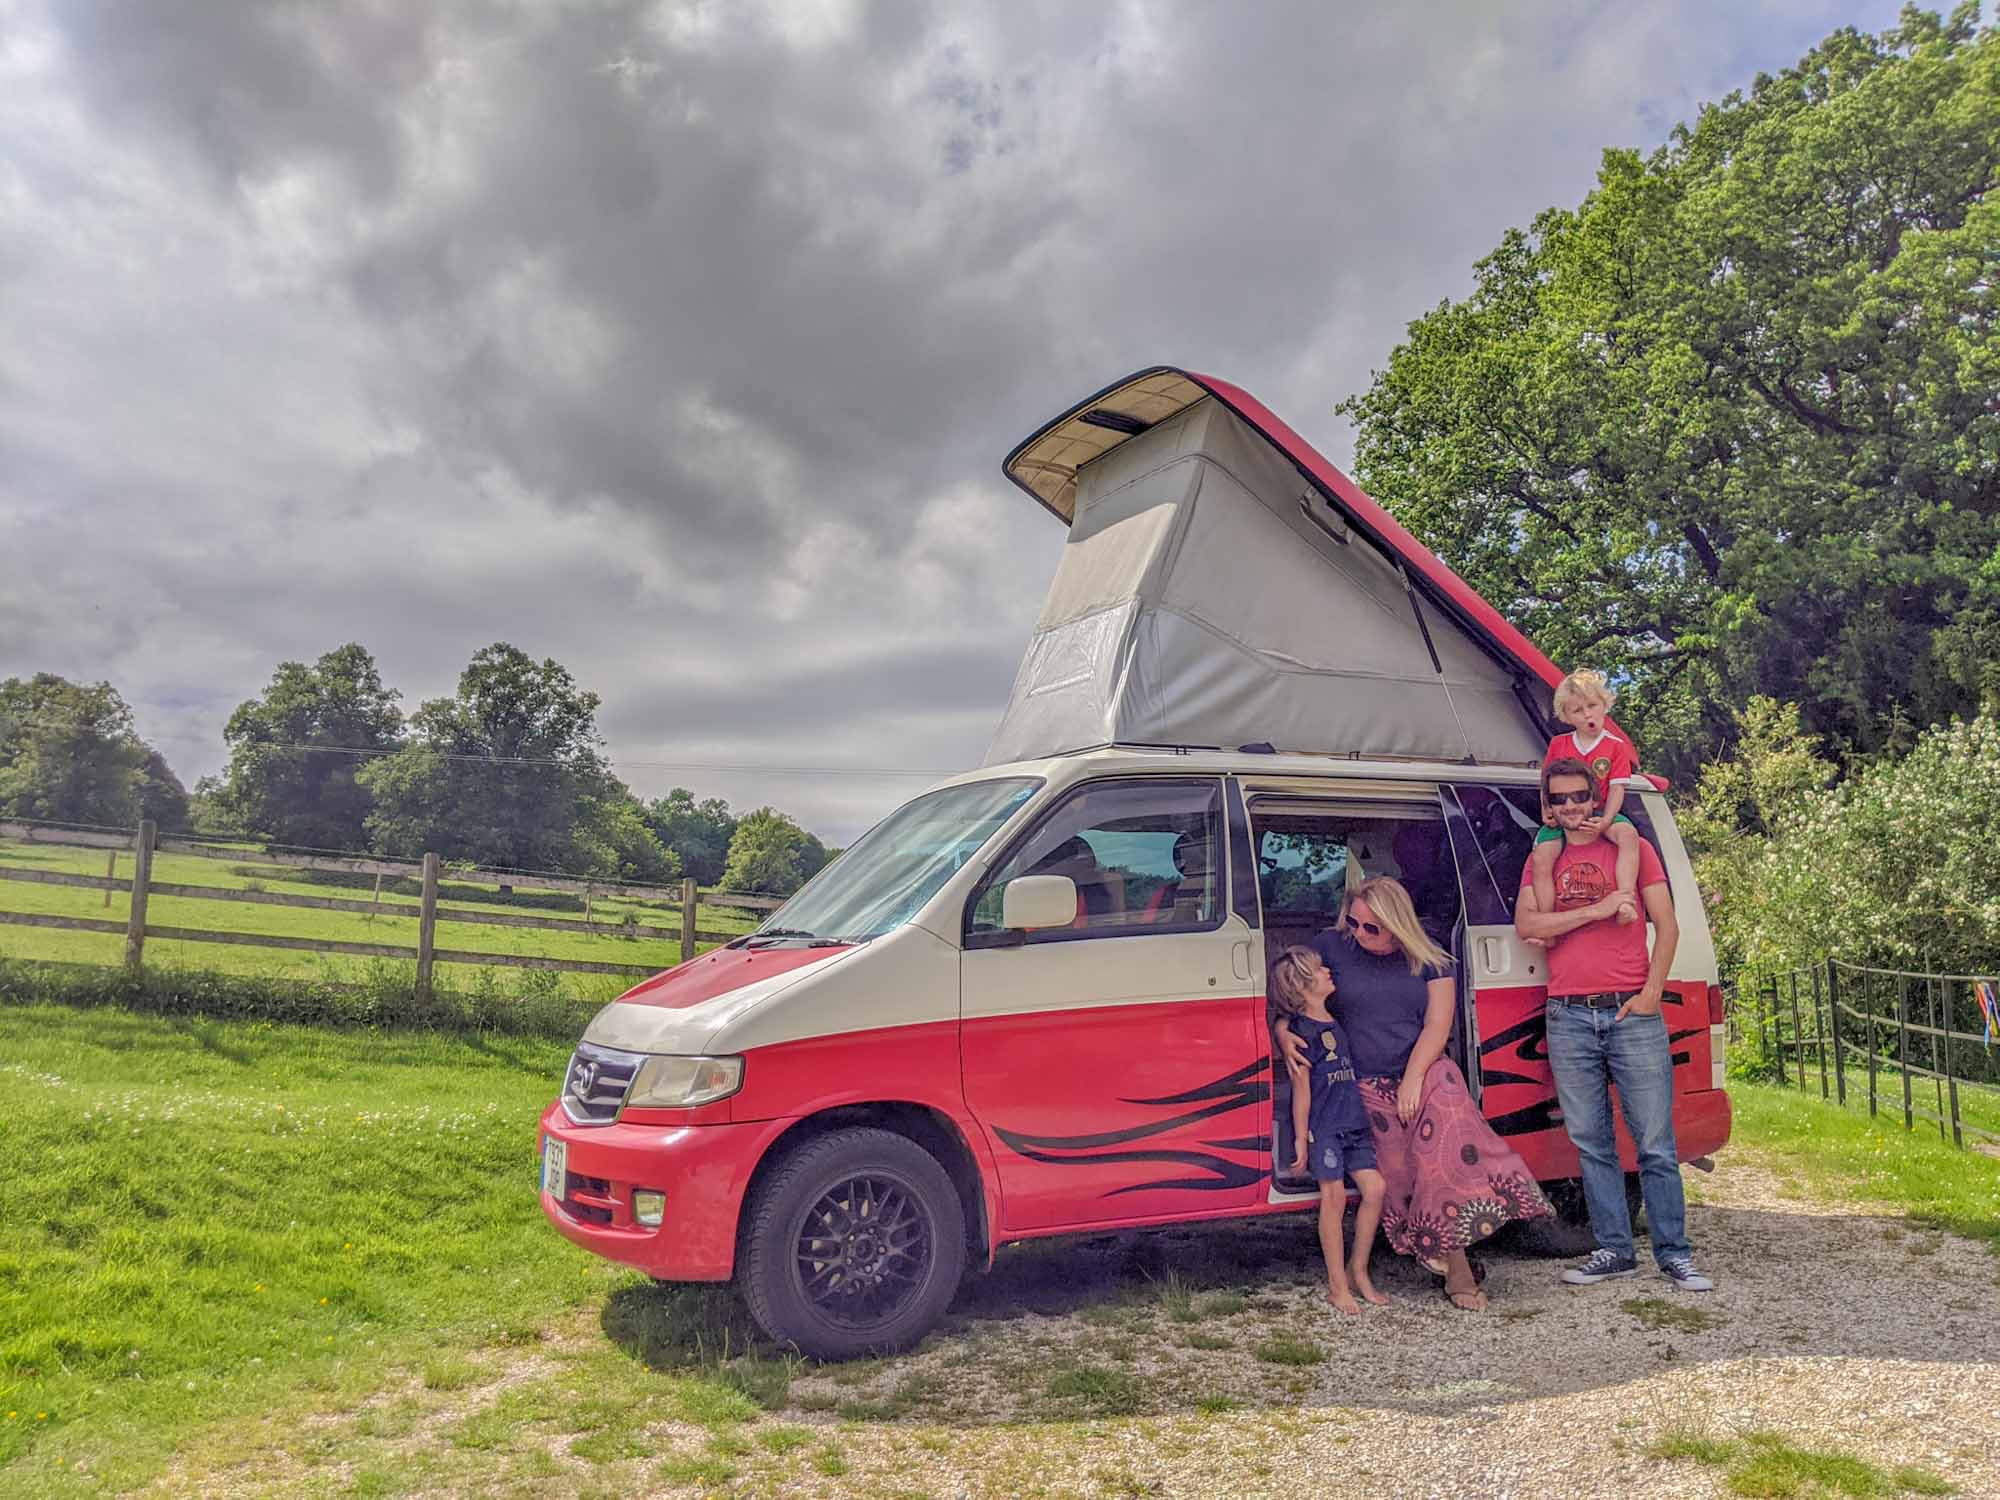 Family gathered around their red, Mazda Bongo camper van in the countryside, with roof raised for camping